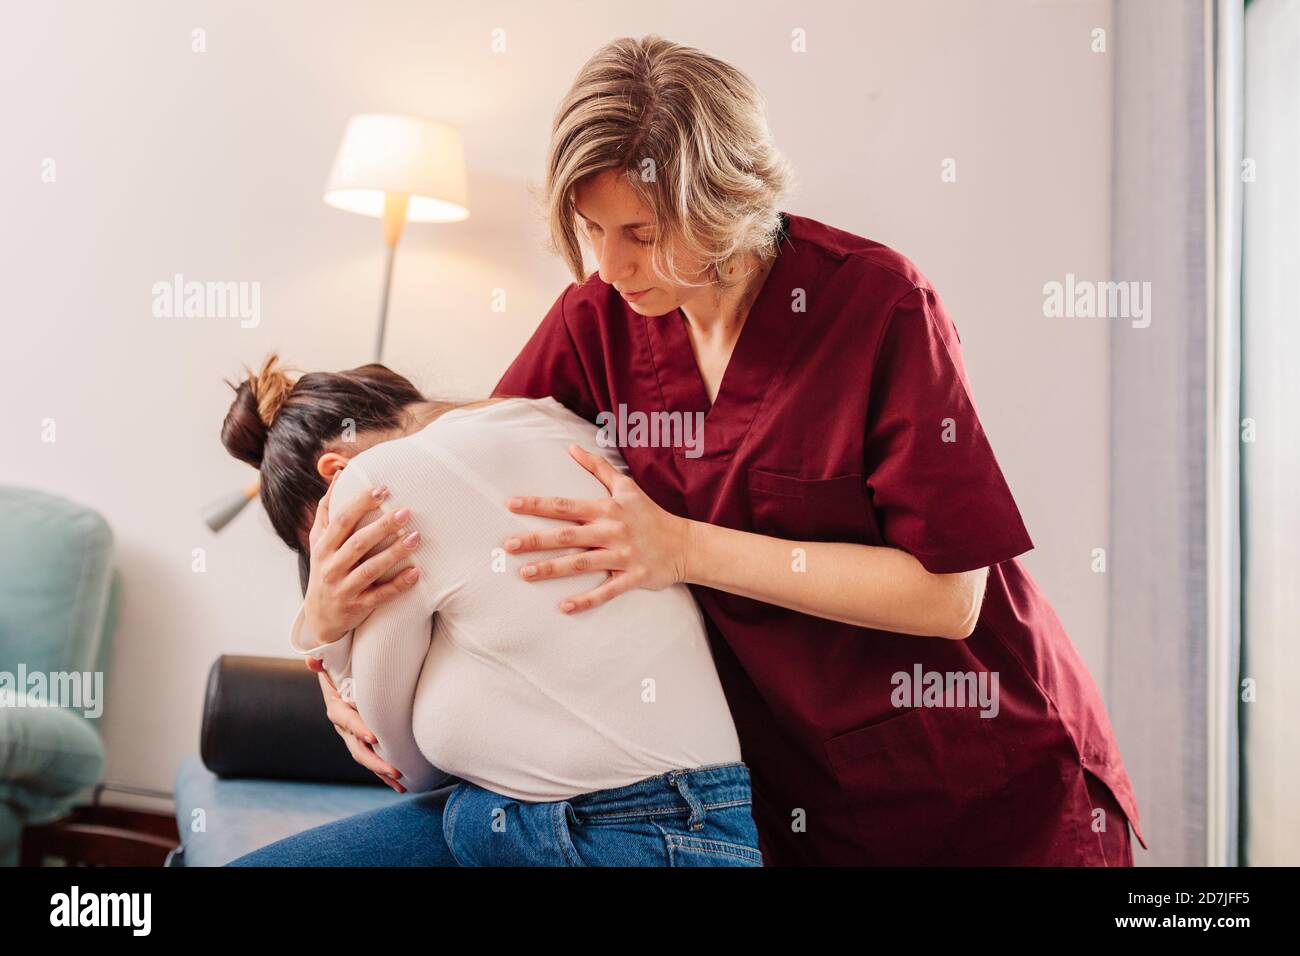 Physiotherapist helping woman for stretching Stock Photo